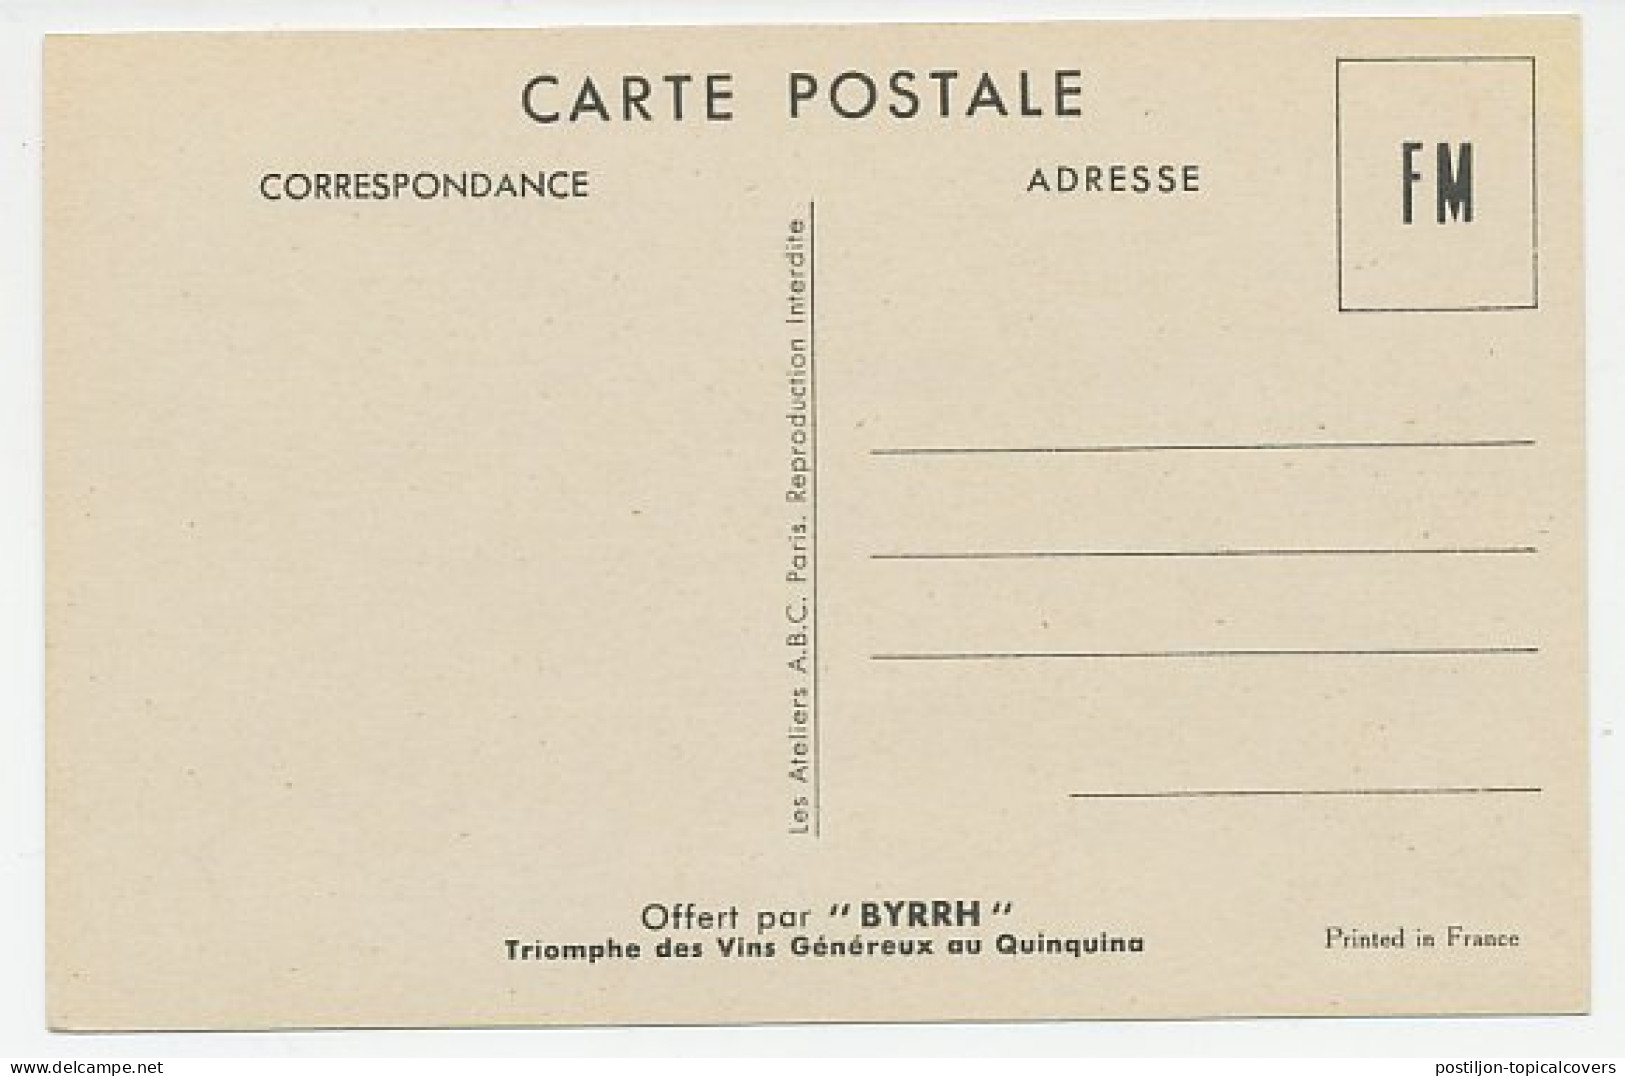 Military Service Card France Soldiers - WWII - Seconda Guerra Mondiale